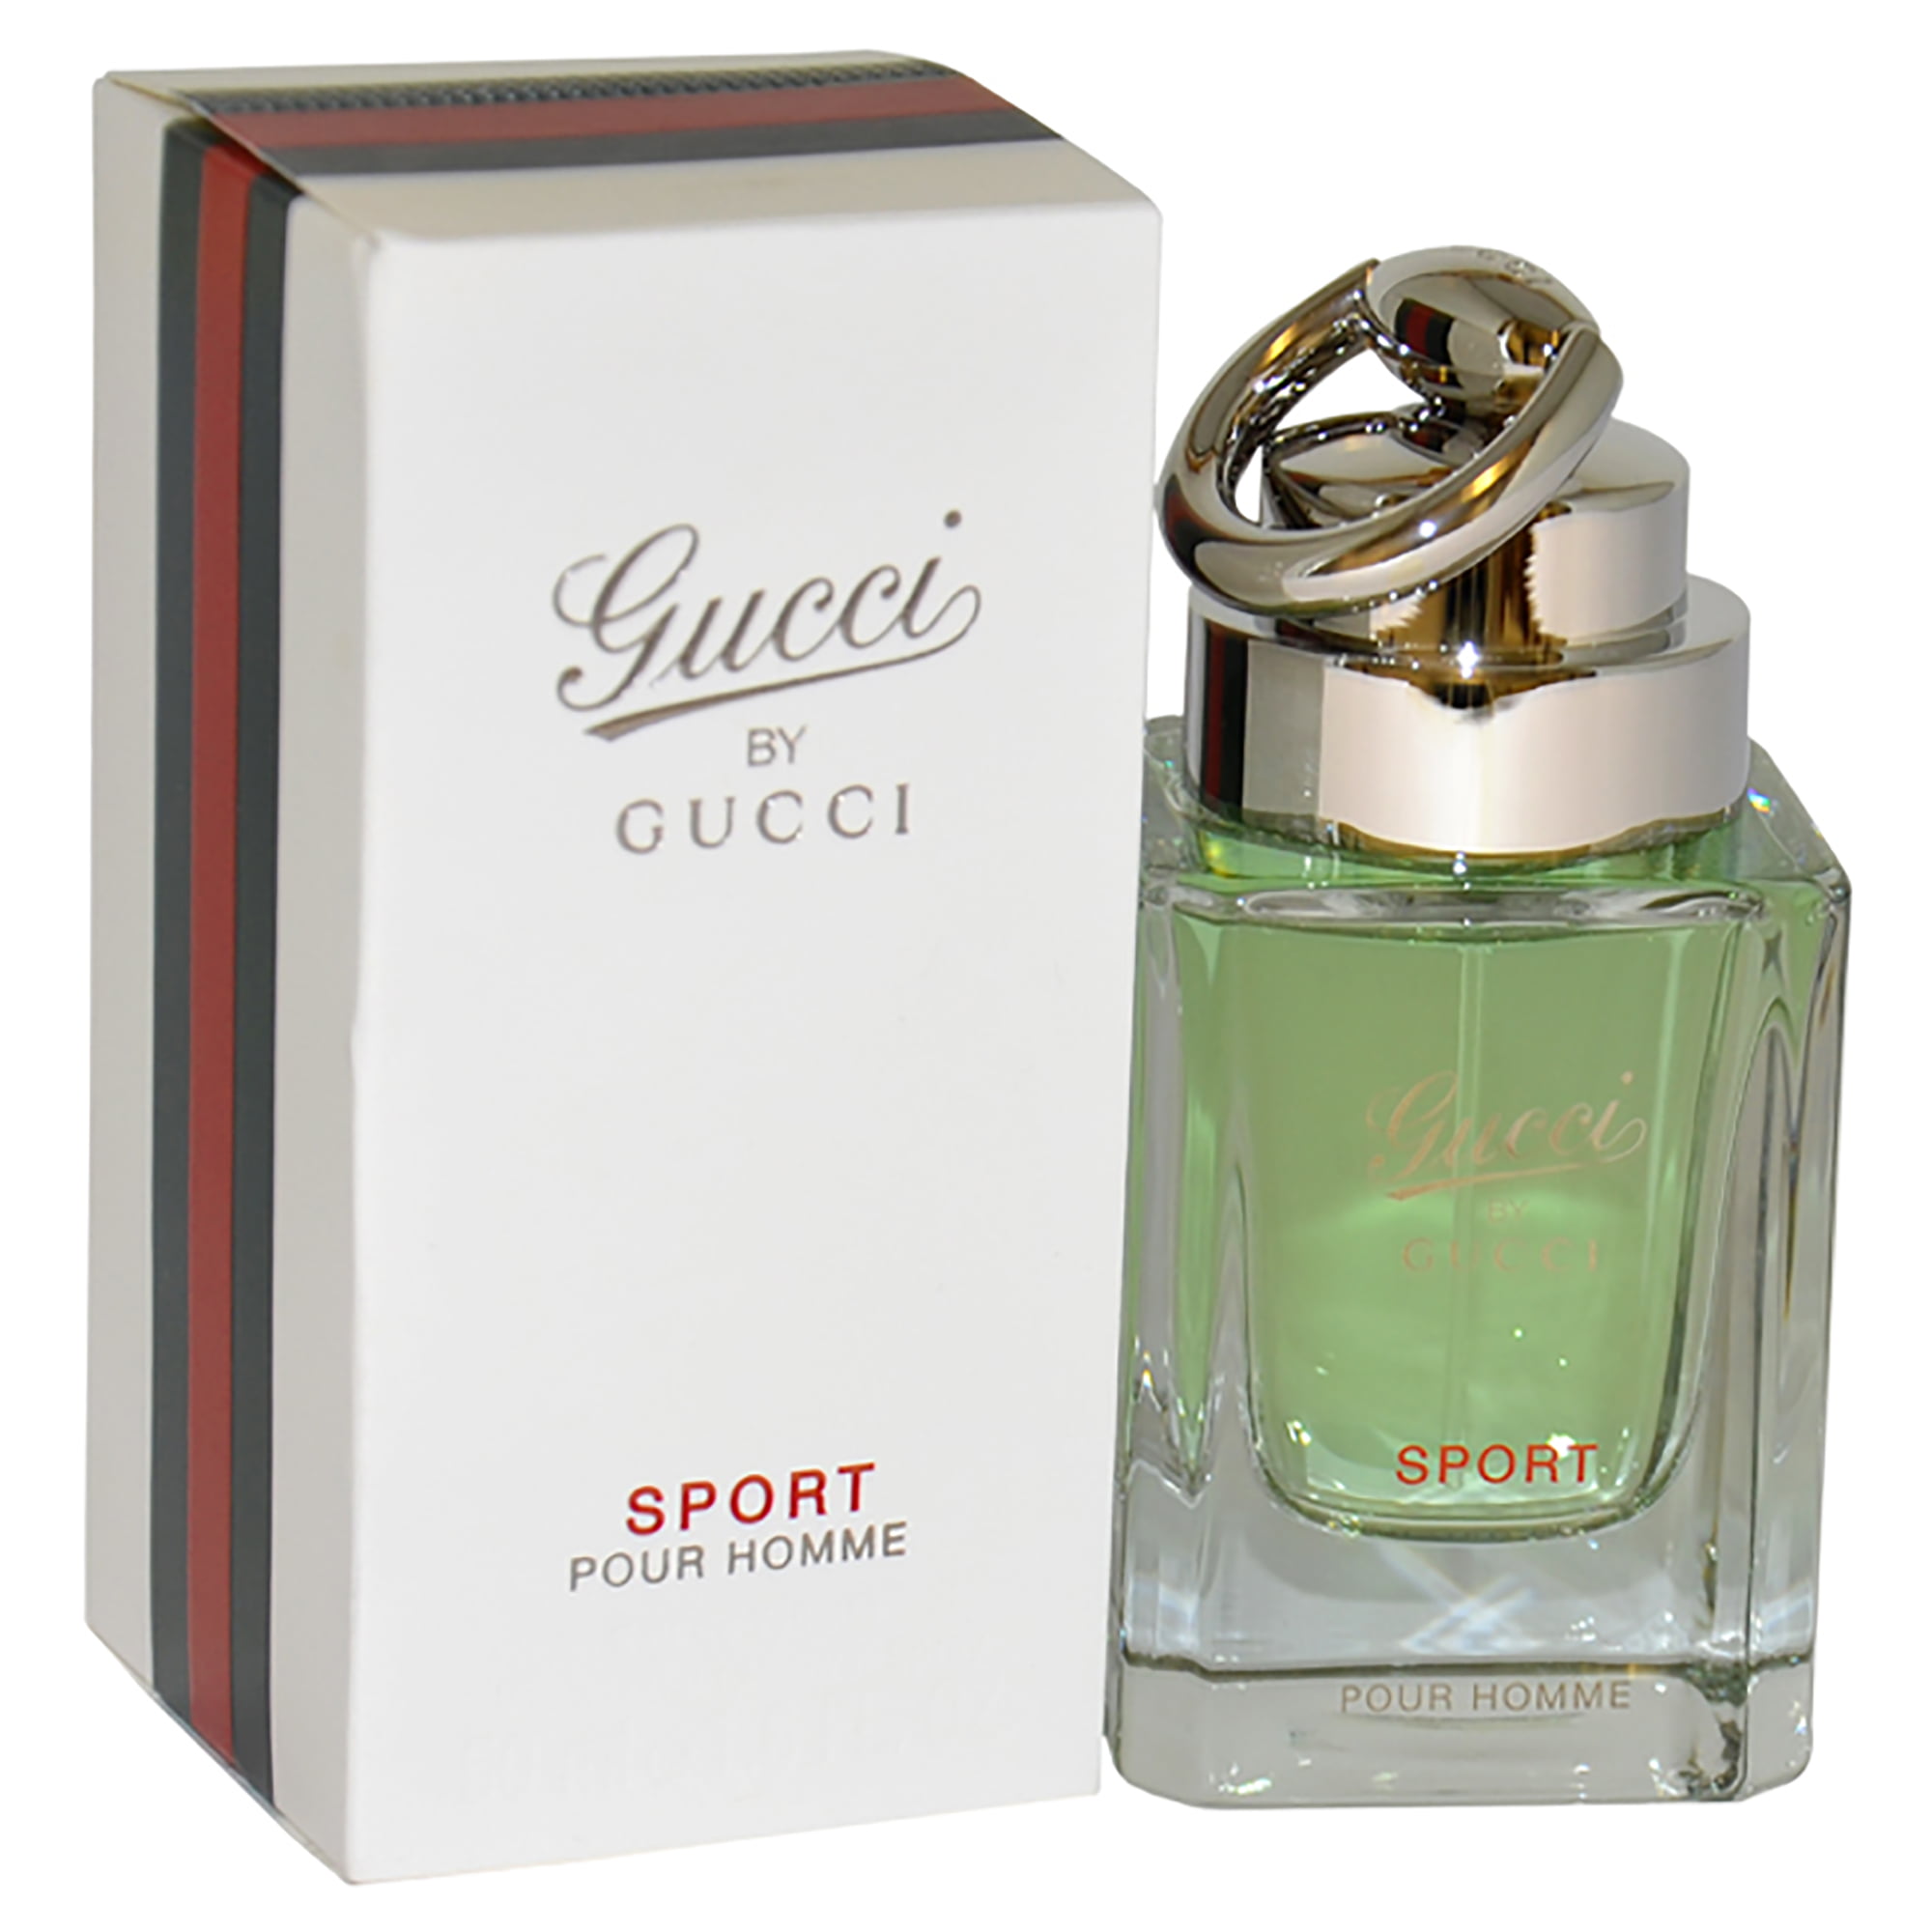 Pour homme sport. Gucci by Gucci Sport. Gucci by Gucci Sport pour homme (Gucci). Gucci by Gucci Sport 90 мл. Gucci by Gucci Sport pour homme (Gucci Parfums).